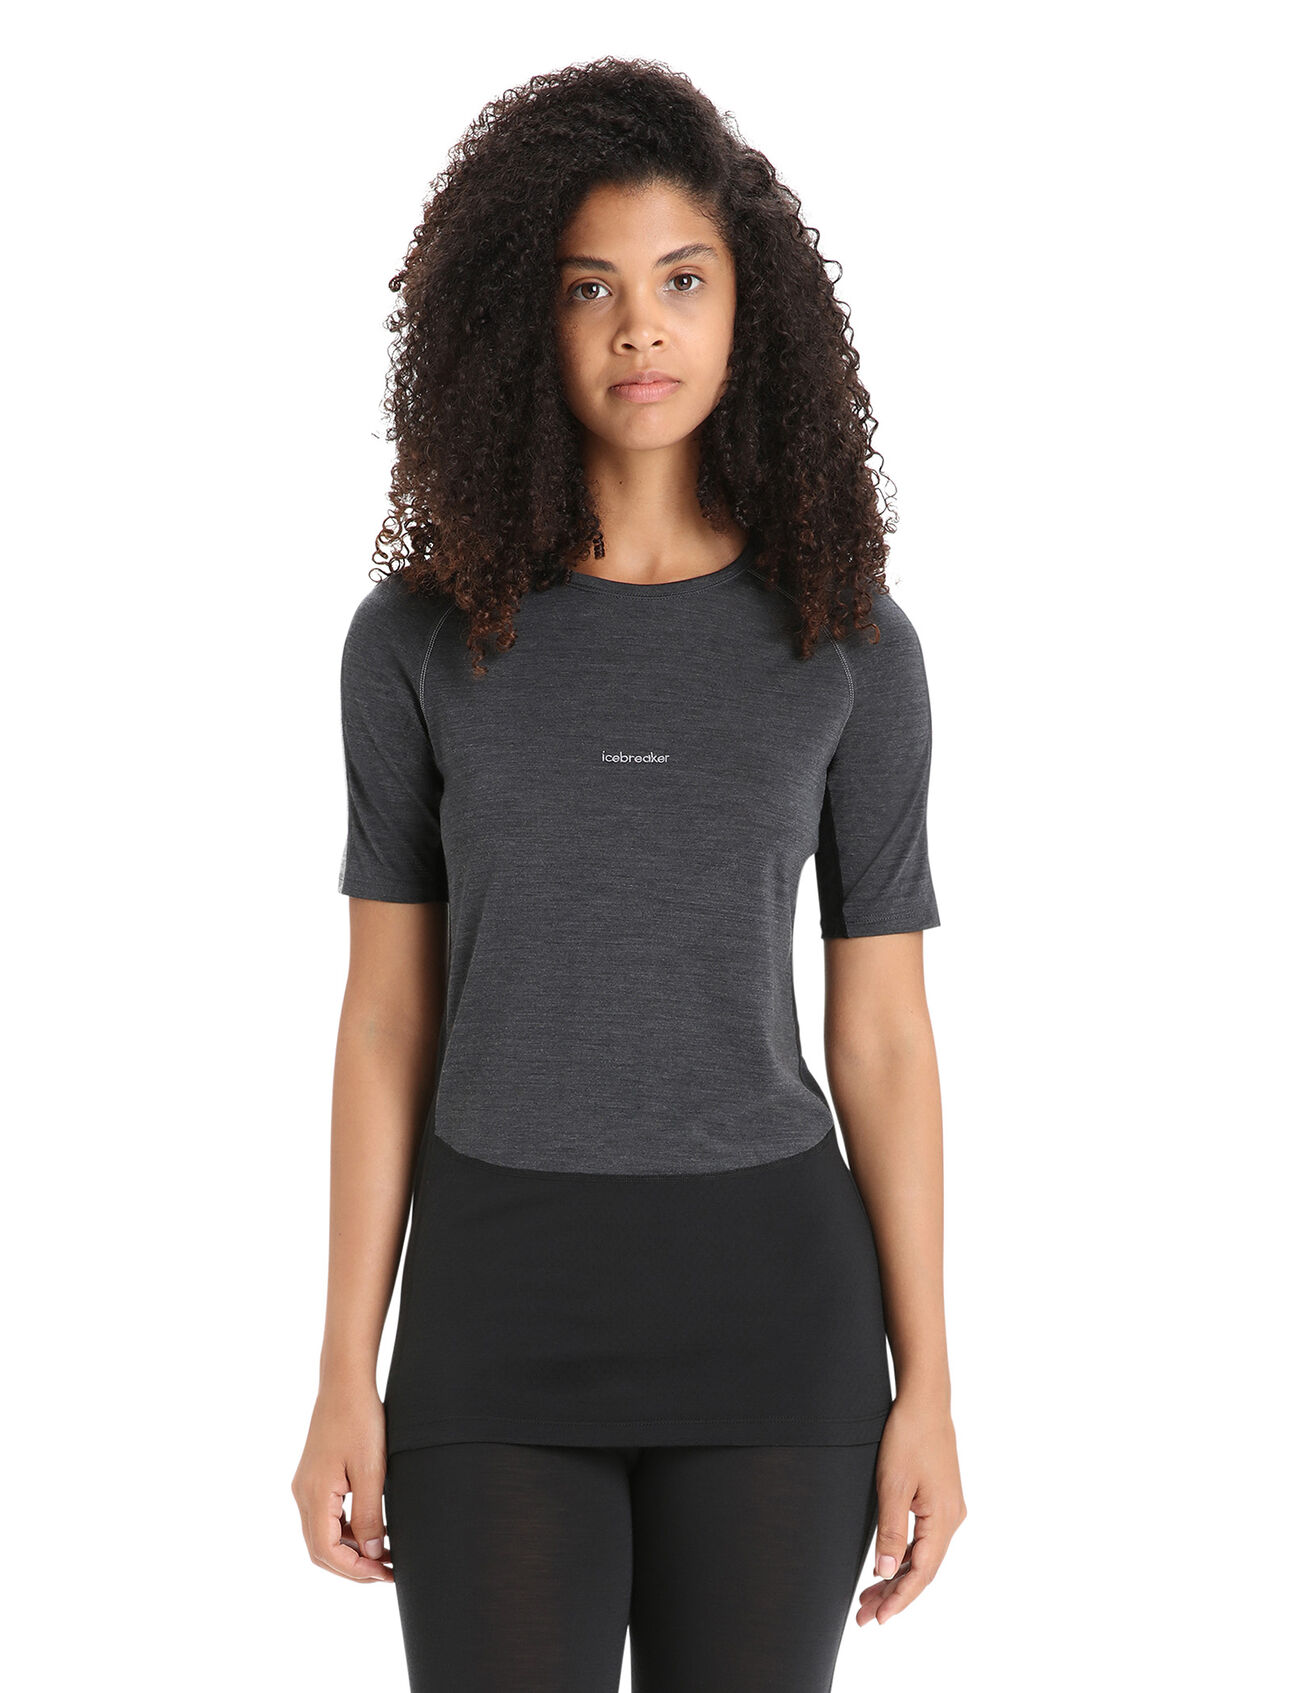 Womens 125 ZoneKnit™ Merino Blend Short Sleeve Crewe Thermal Top An ultralight merino base layer top designed to help regulate body temperature during high-intensity activity, the 125 ZoneKnit™ Short Sleeve Crewe features our jersey Cool-Lite™ fabric for adventure and everyday training.